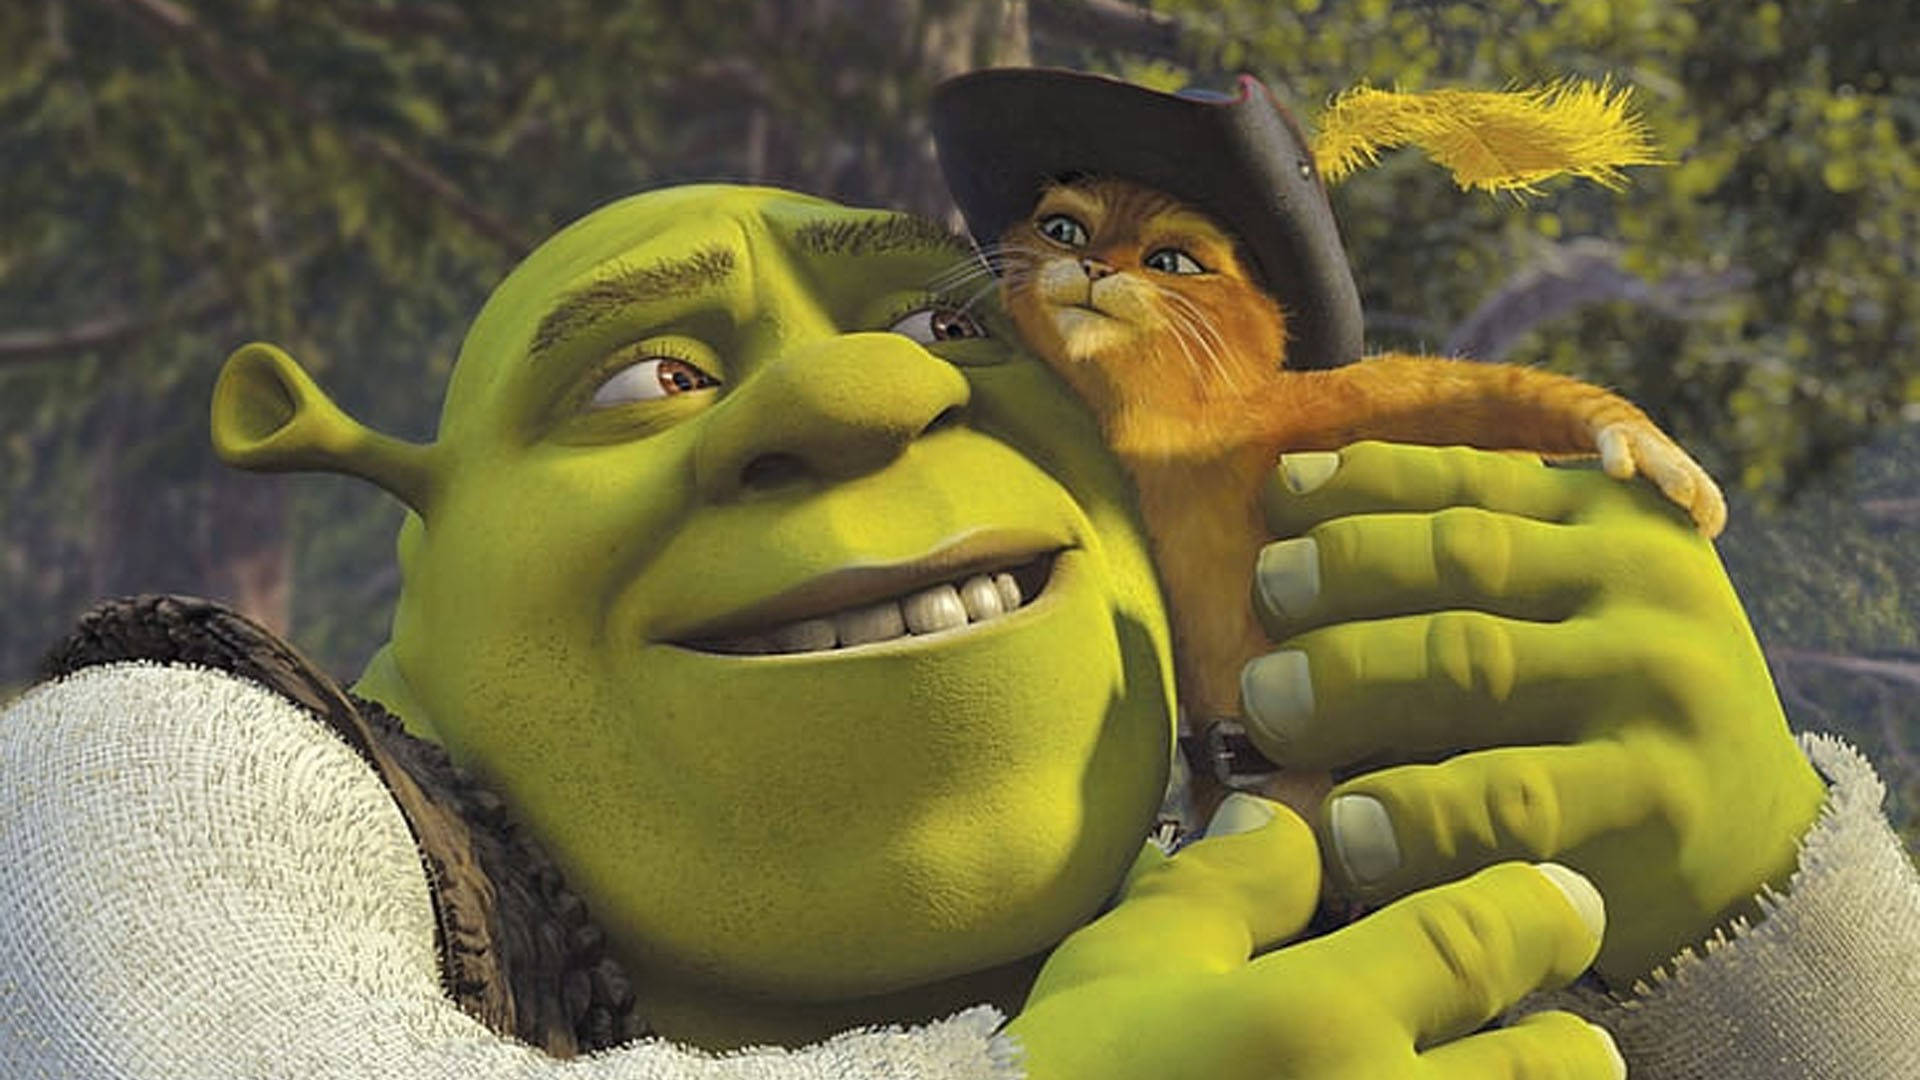 Shrek And Puss In Boots Wallpaper